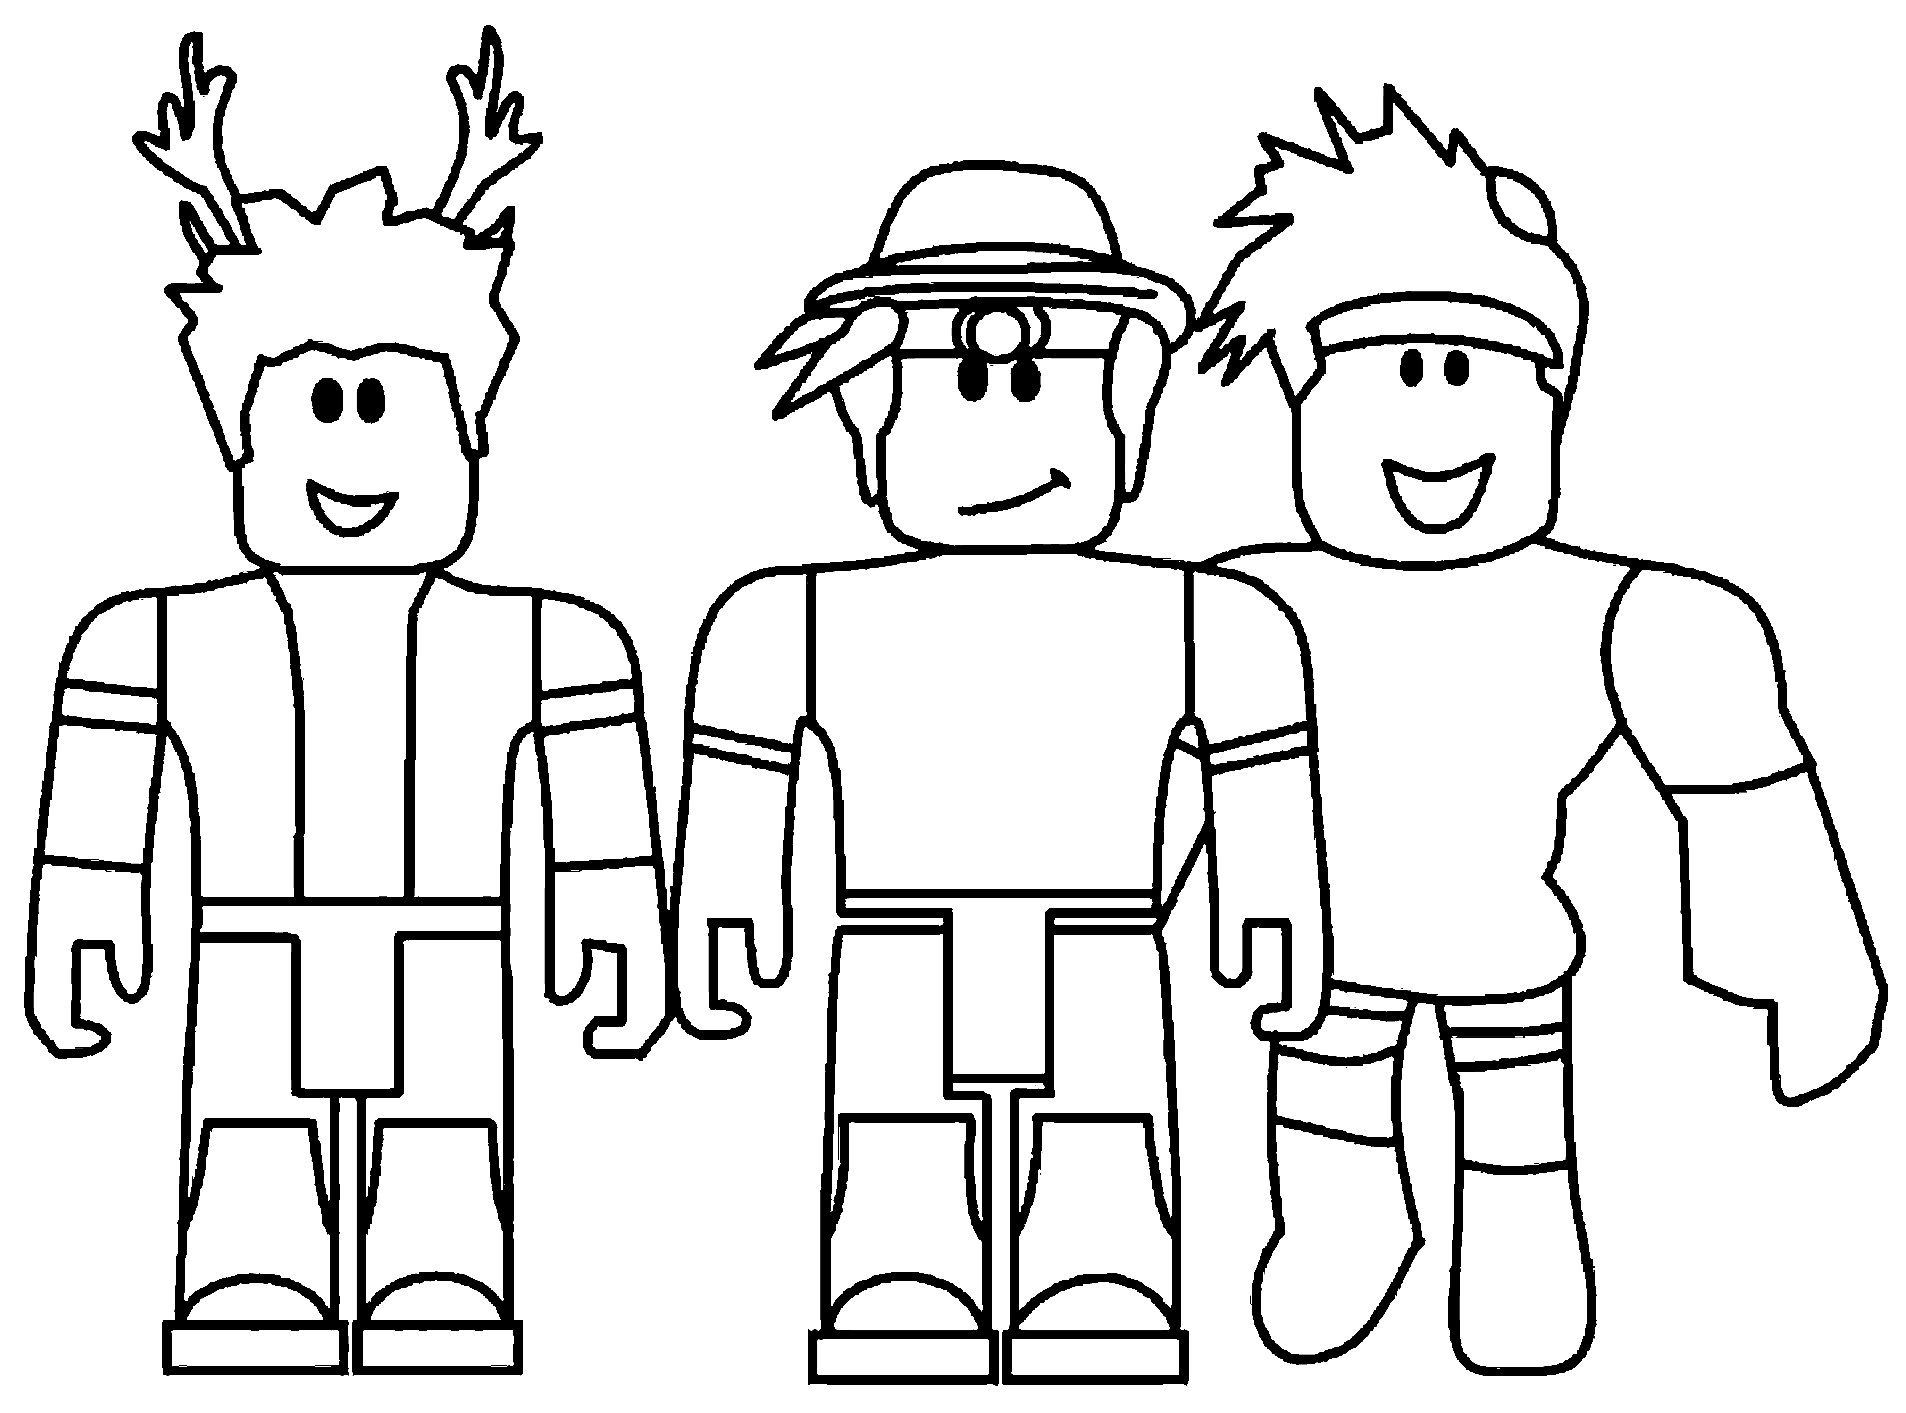 Roblox-characters-smiling